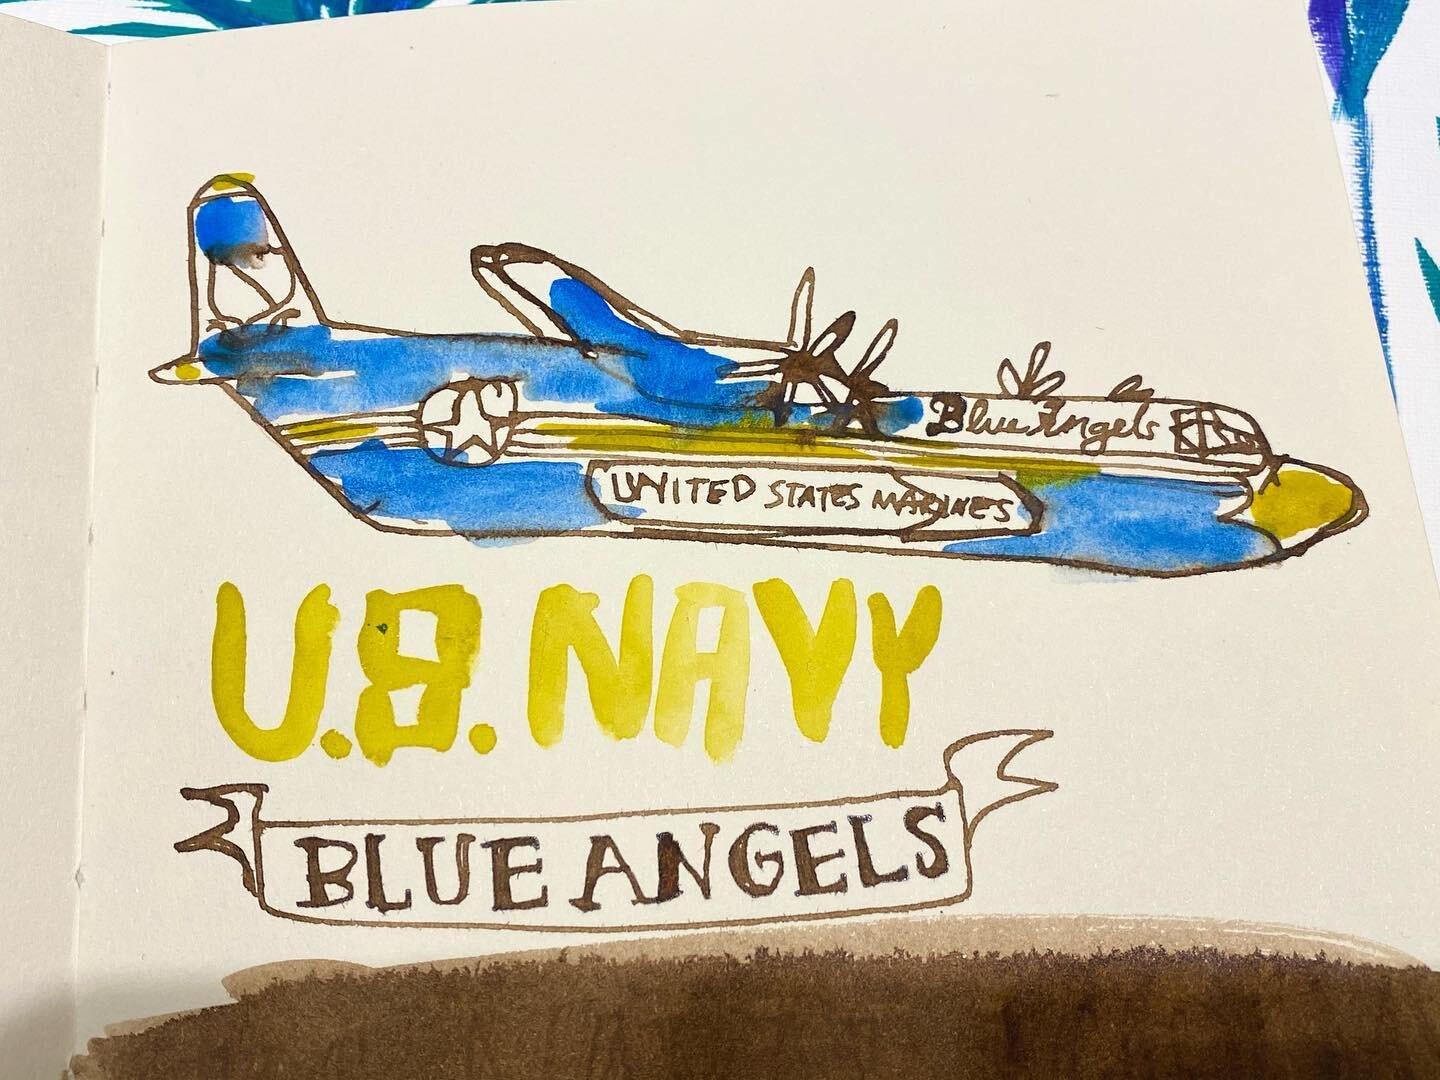 Ready for the @usnavyblueangels ! Nothing cooler.

#loveannapolis #blueangels 
@annapolisdiscovered @visitannapolis #doodles #sketchbook #sketching